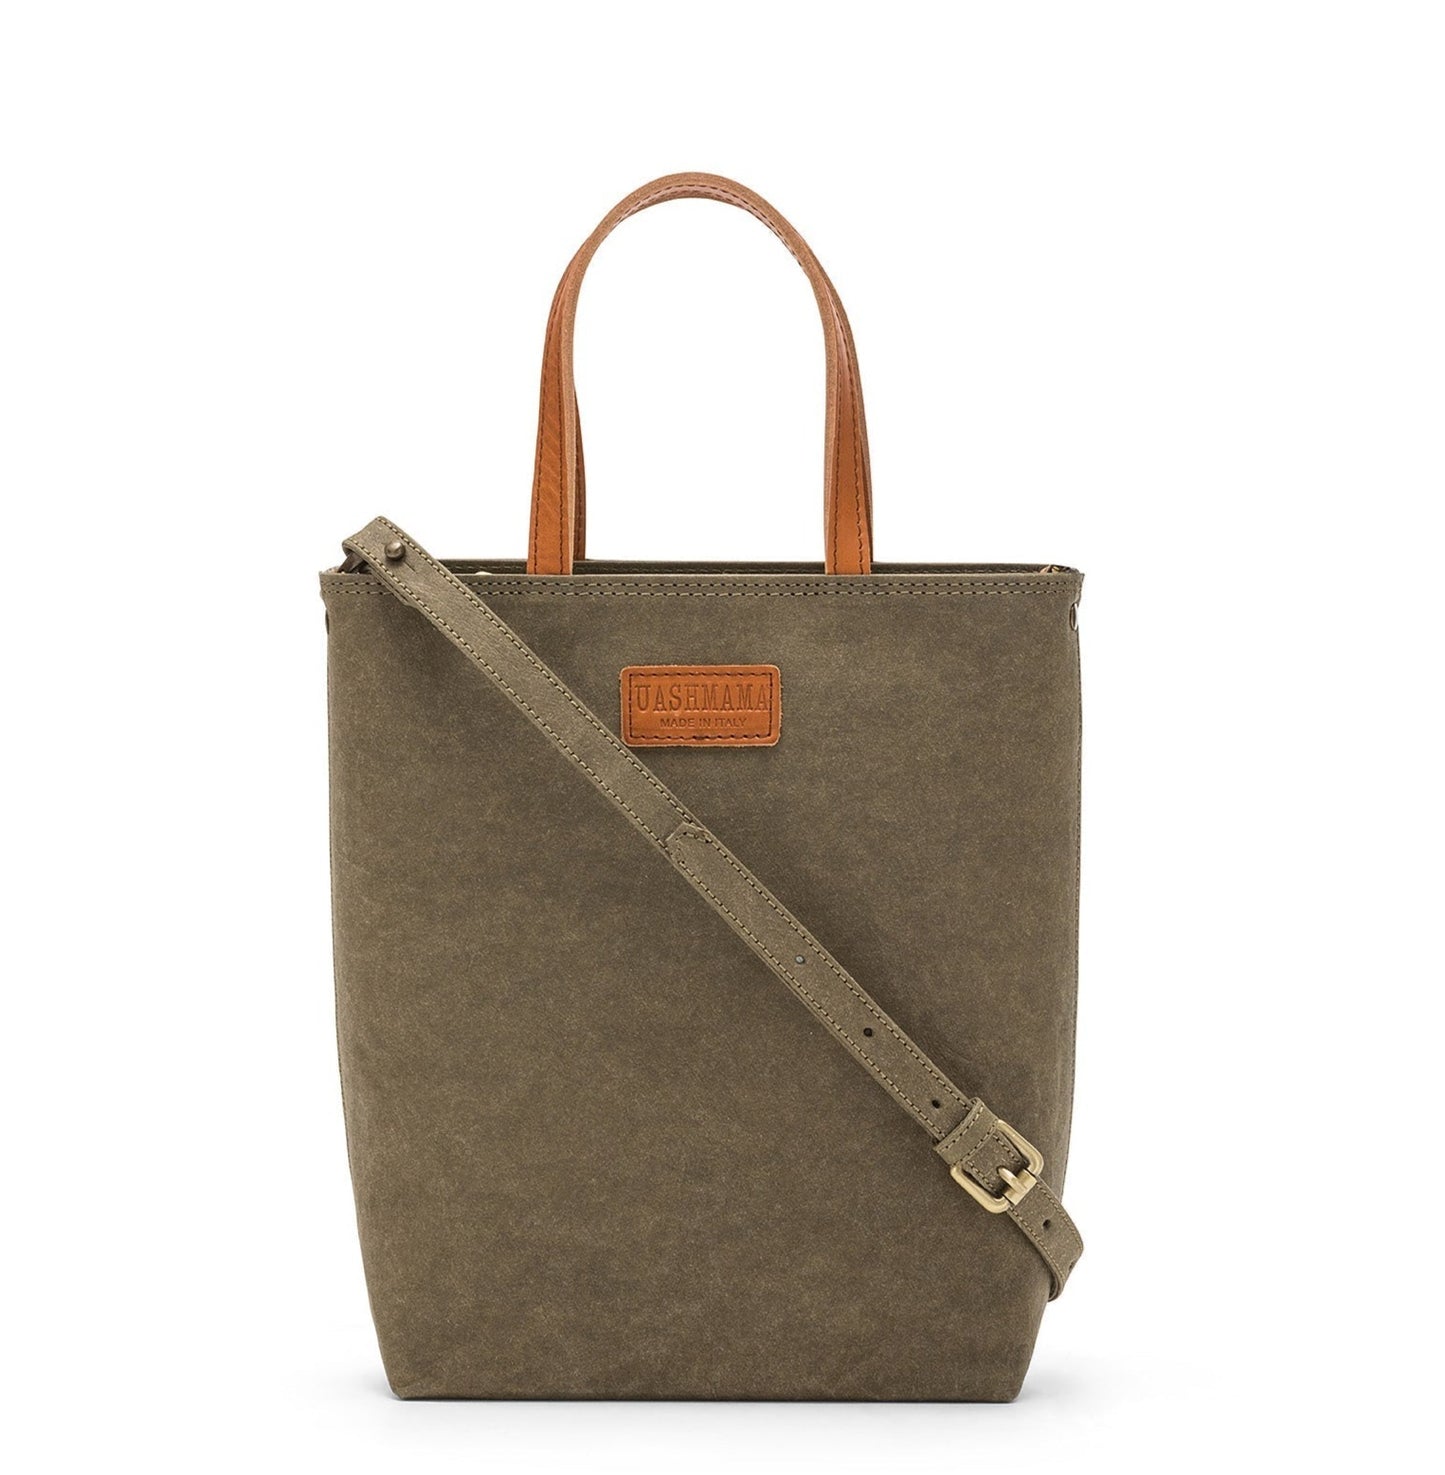 A washable paper rectangular tote with long top handles and a long shoulder strap is shown from the front angle. It is khaki in colour.